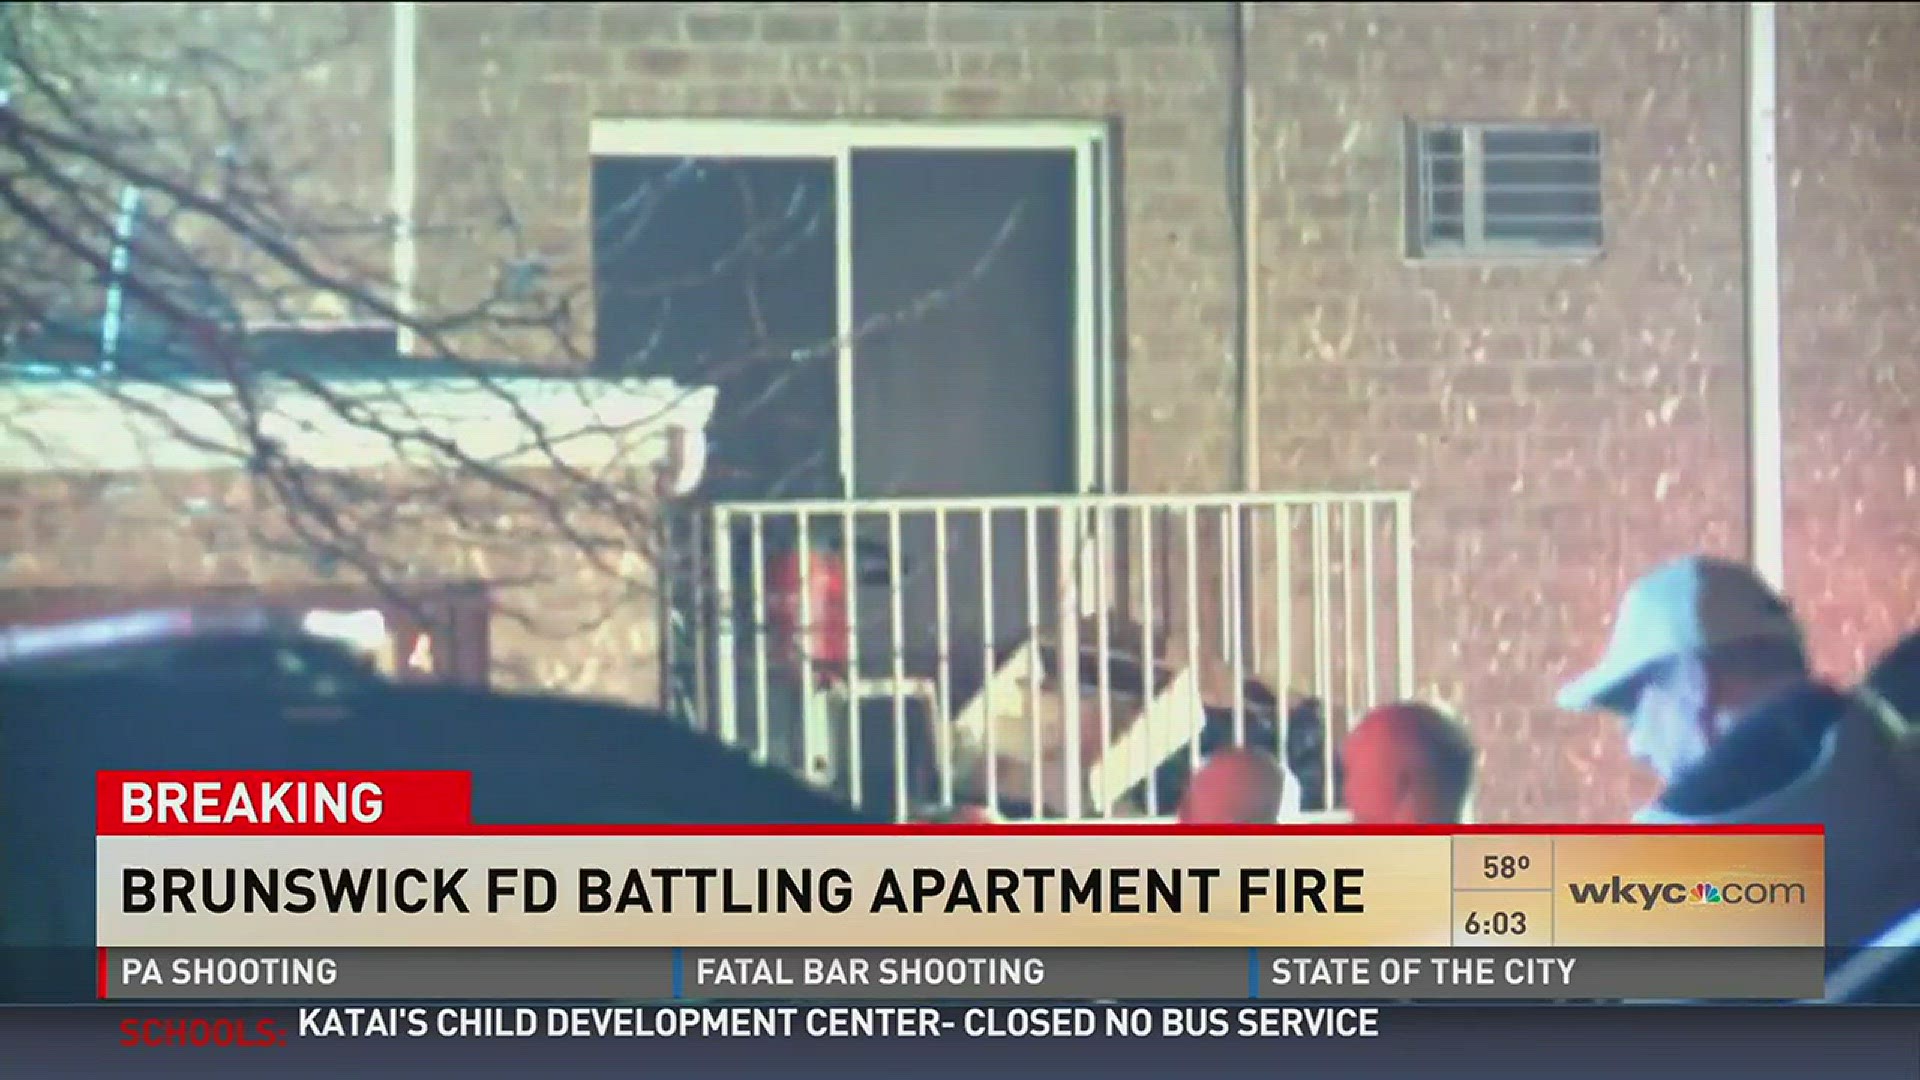 March 10, 2016: WKYC's Will Ujek is at the scene of yet another Brunswick apartment fire. Follow @WillUjek on Twitter for more updates.